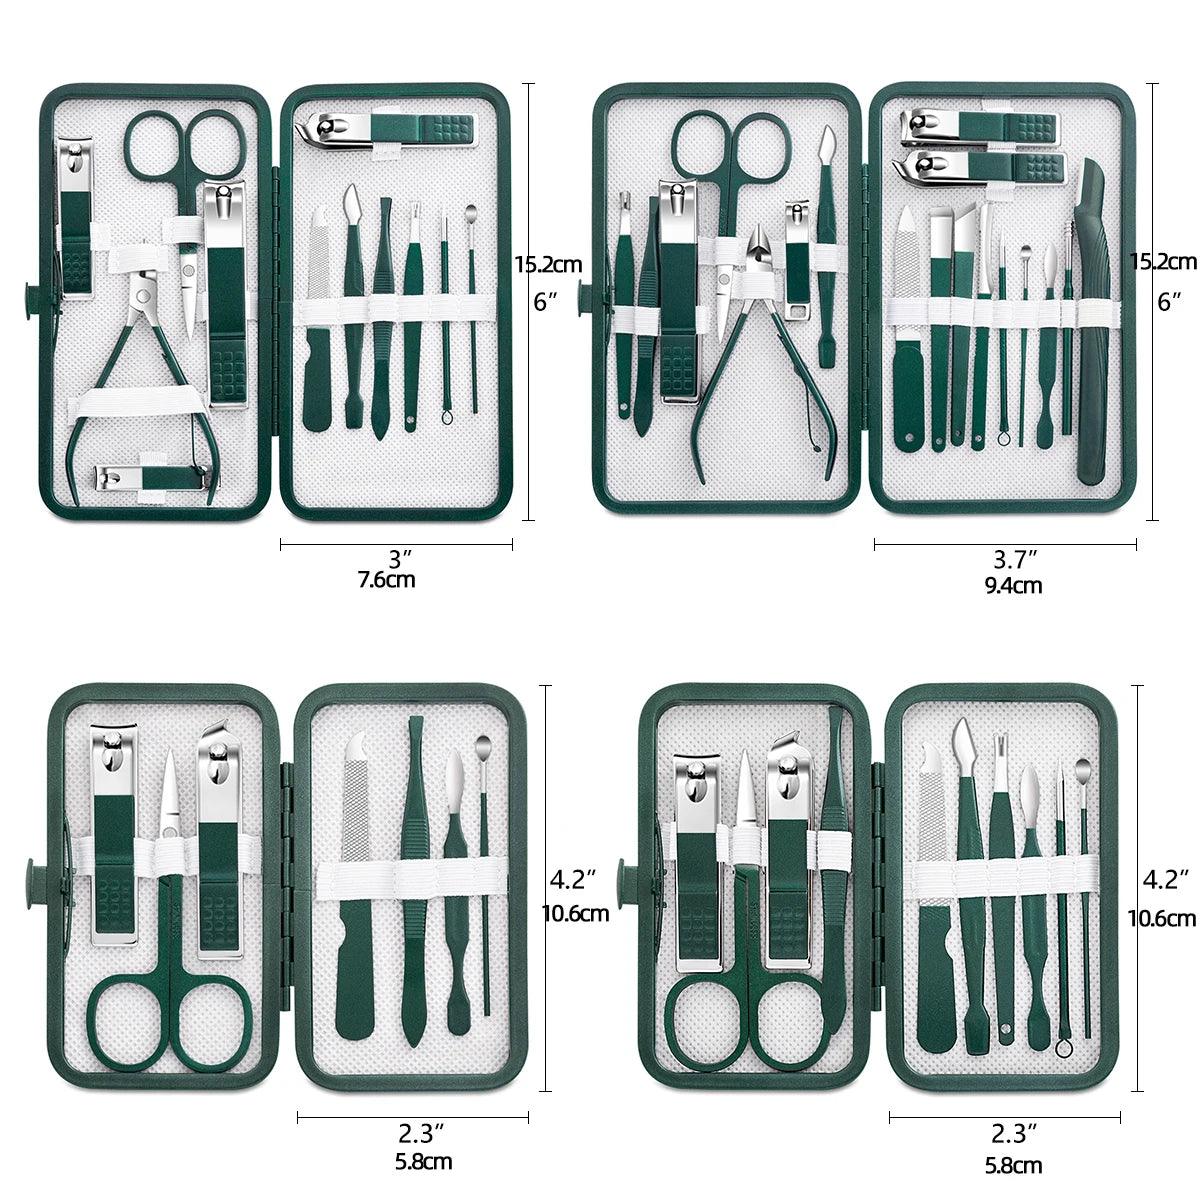 Nail Care Essentials Kit: Premium Stainless Steel Grooming Set With Travel Case  ourlum.com   